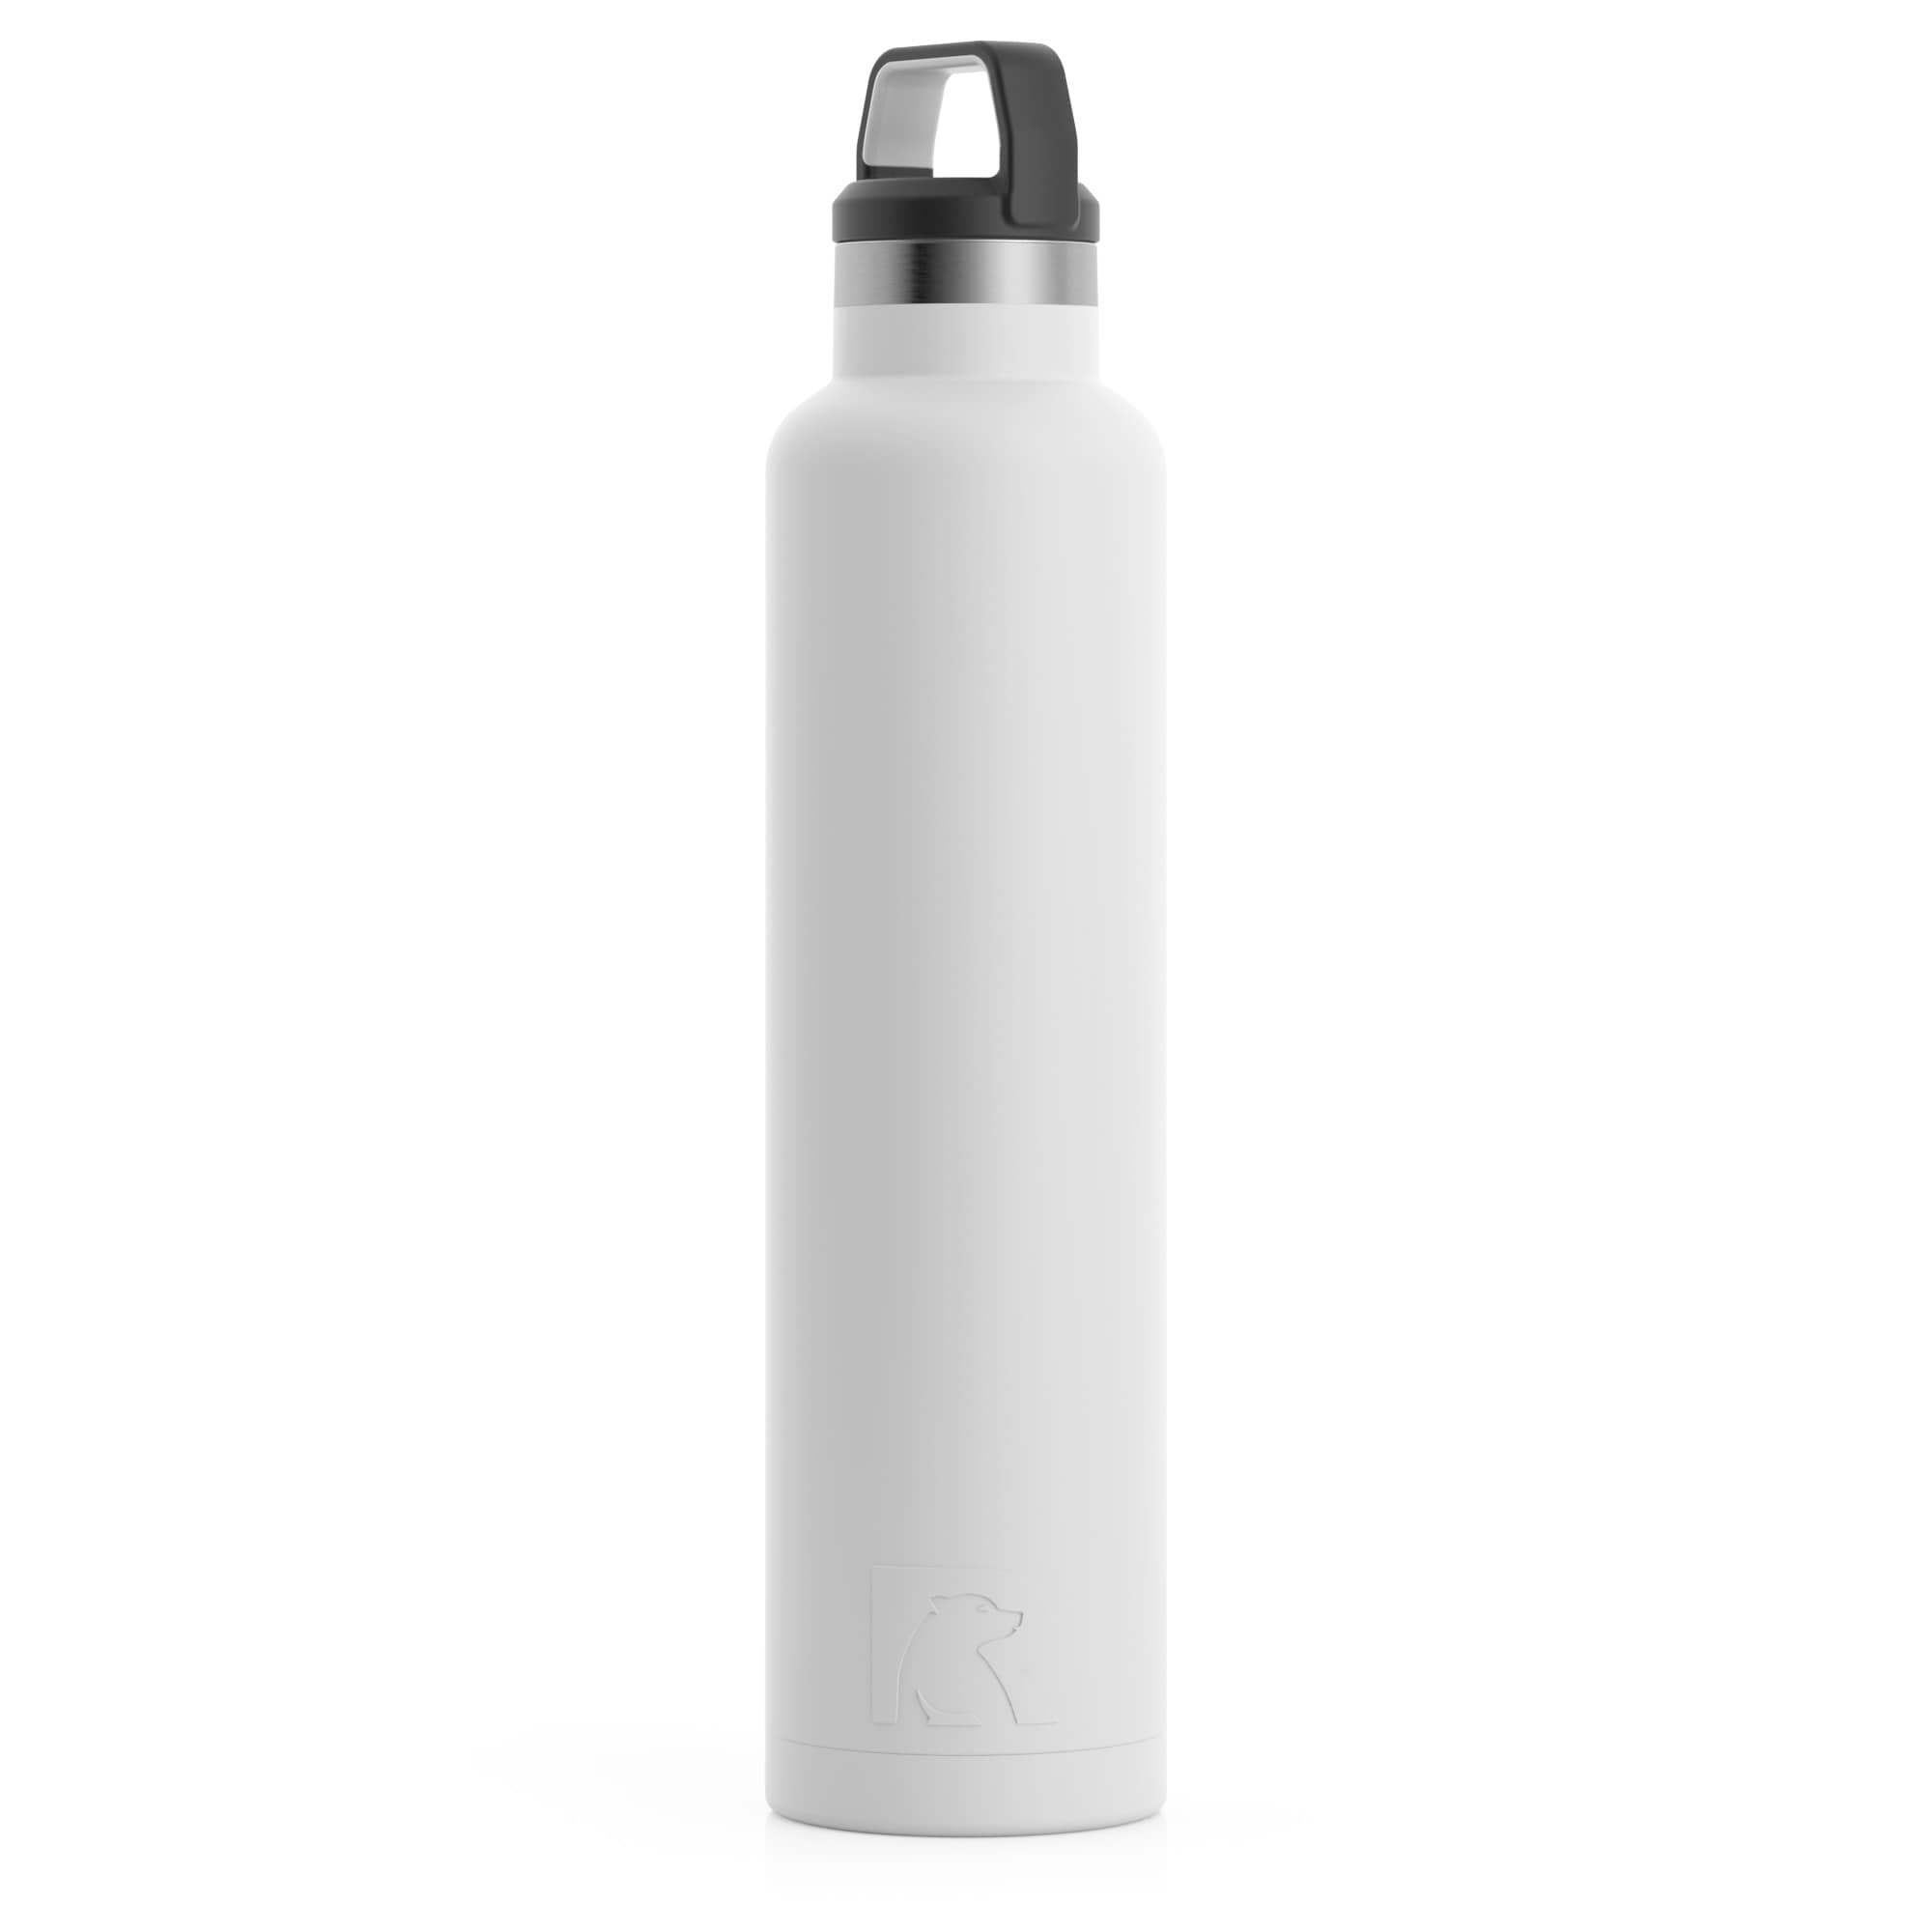 RTIC Outdoors 32-fl oz Stainless Steel Insulated Water Bottle in